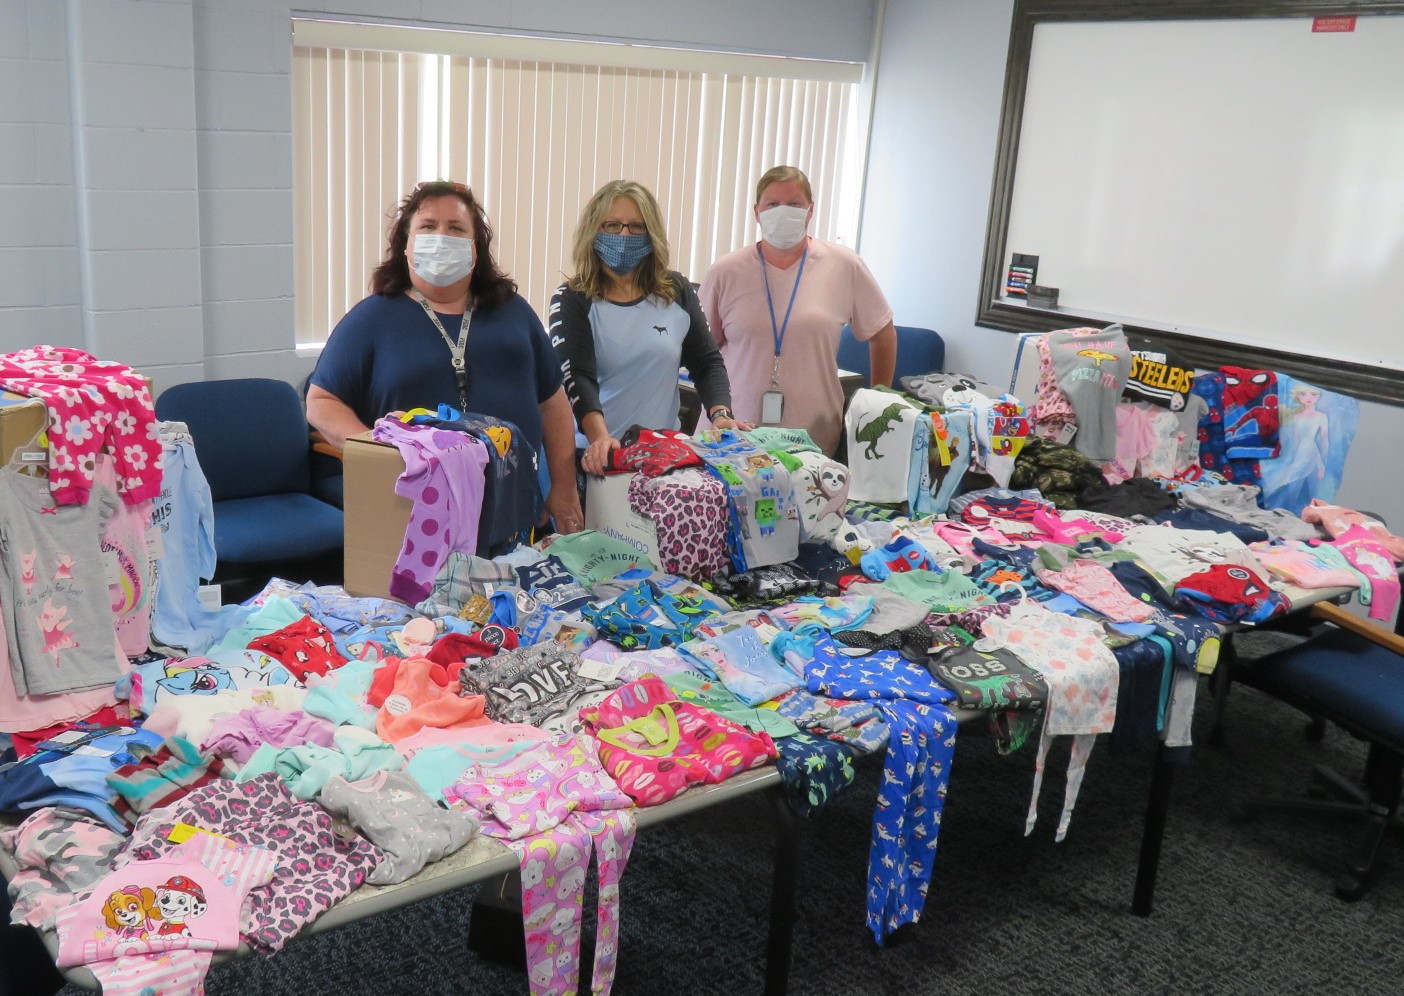 SCI Greene staff stand with their donation of pajamas